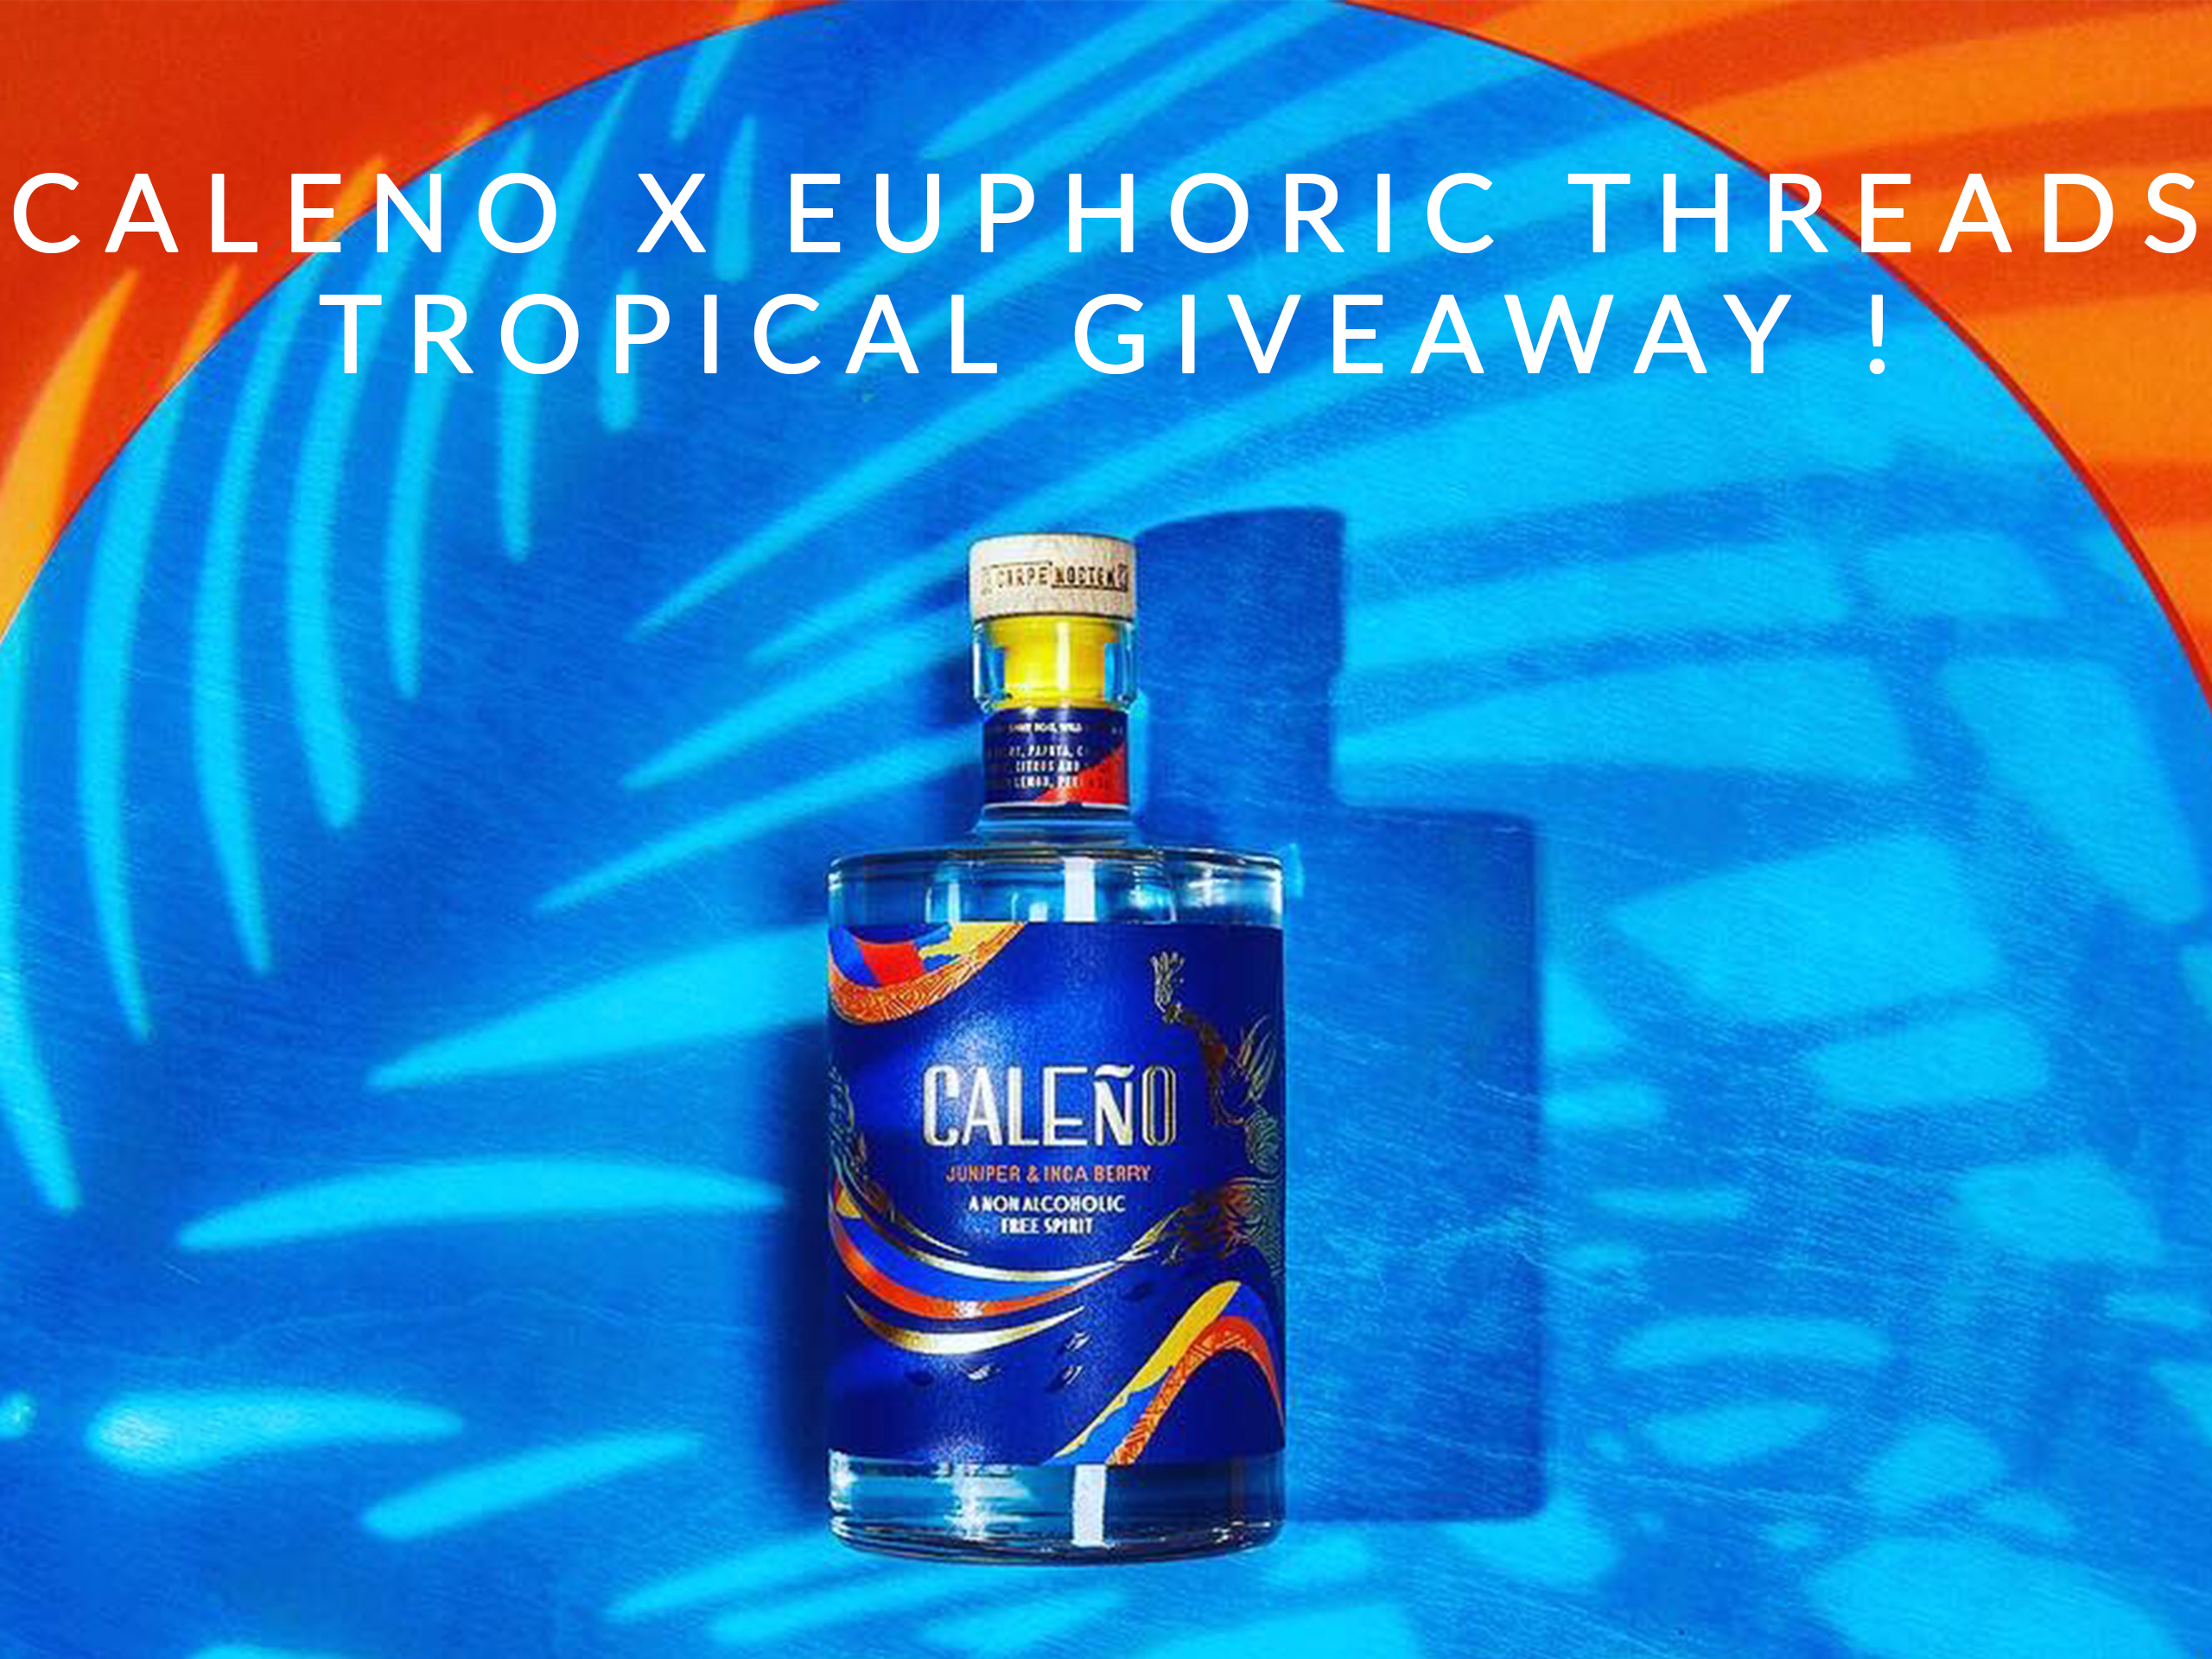 Caleno non-alcoholic drinks Euphoric Threads tropical giveaway